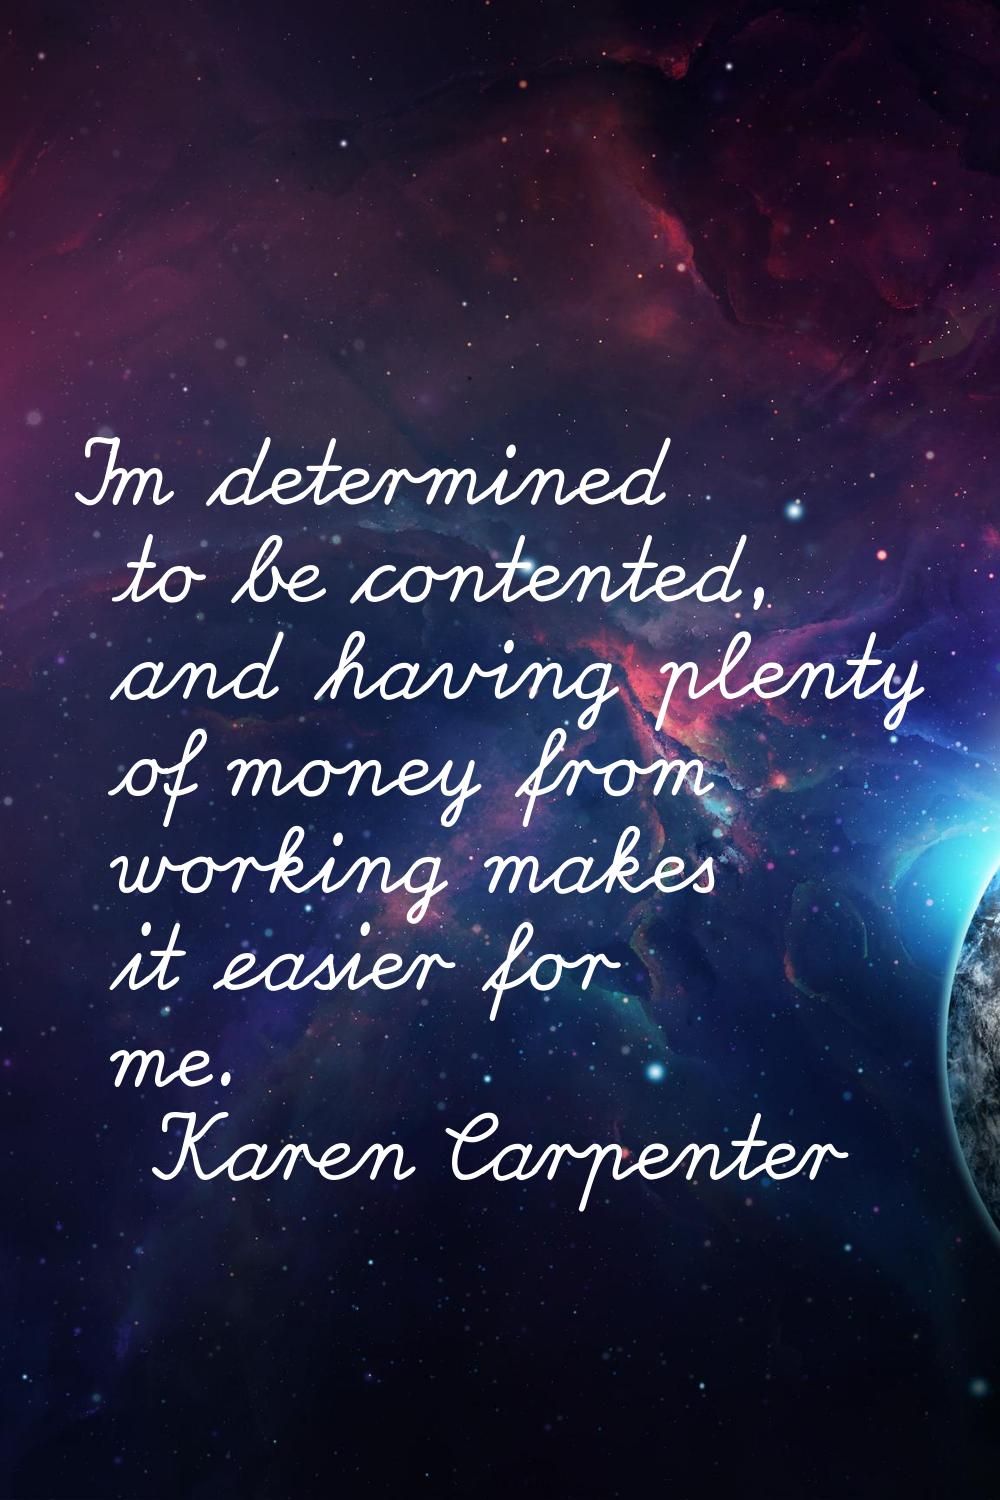 I'm determined to be contented, and having plenty of money from working makes it easier for me.